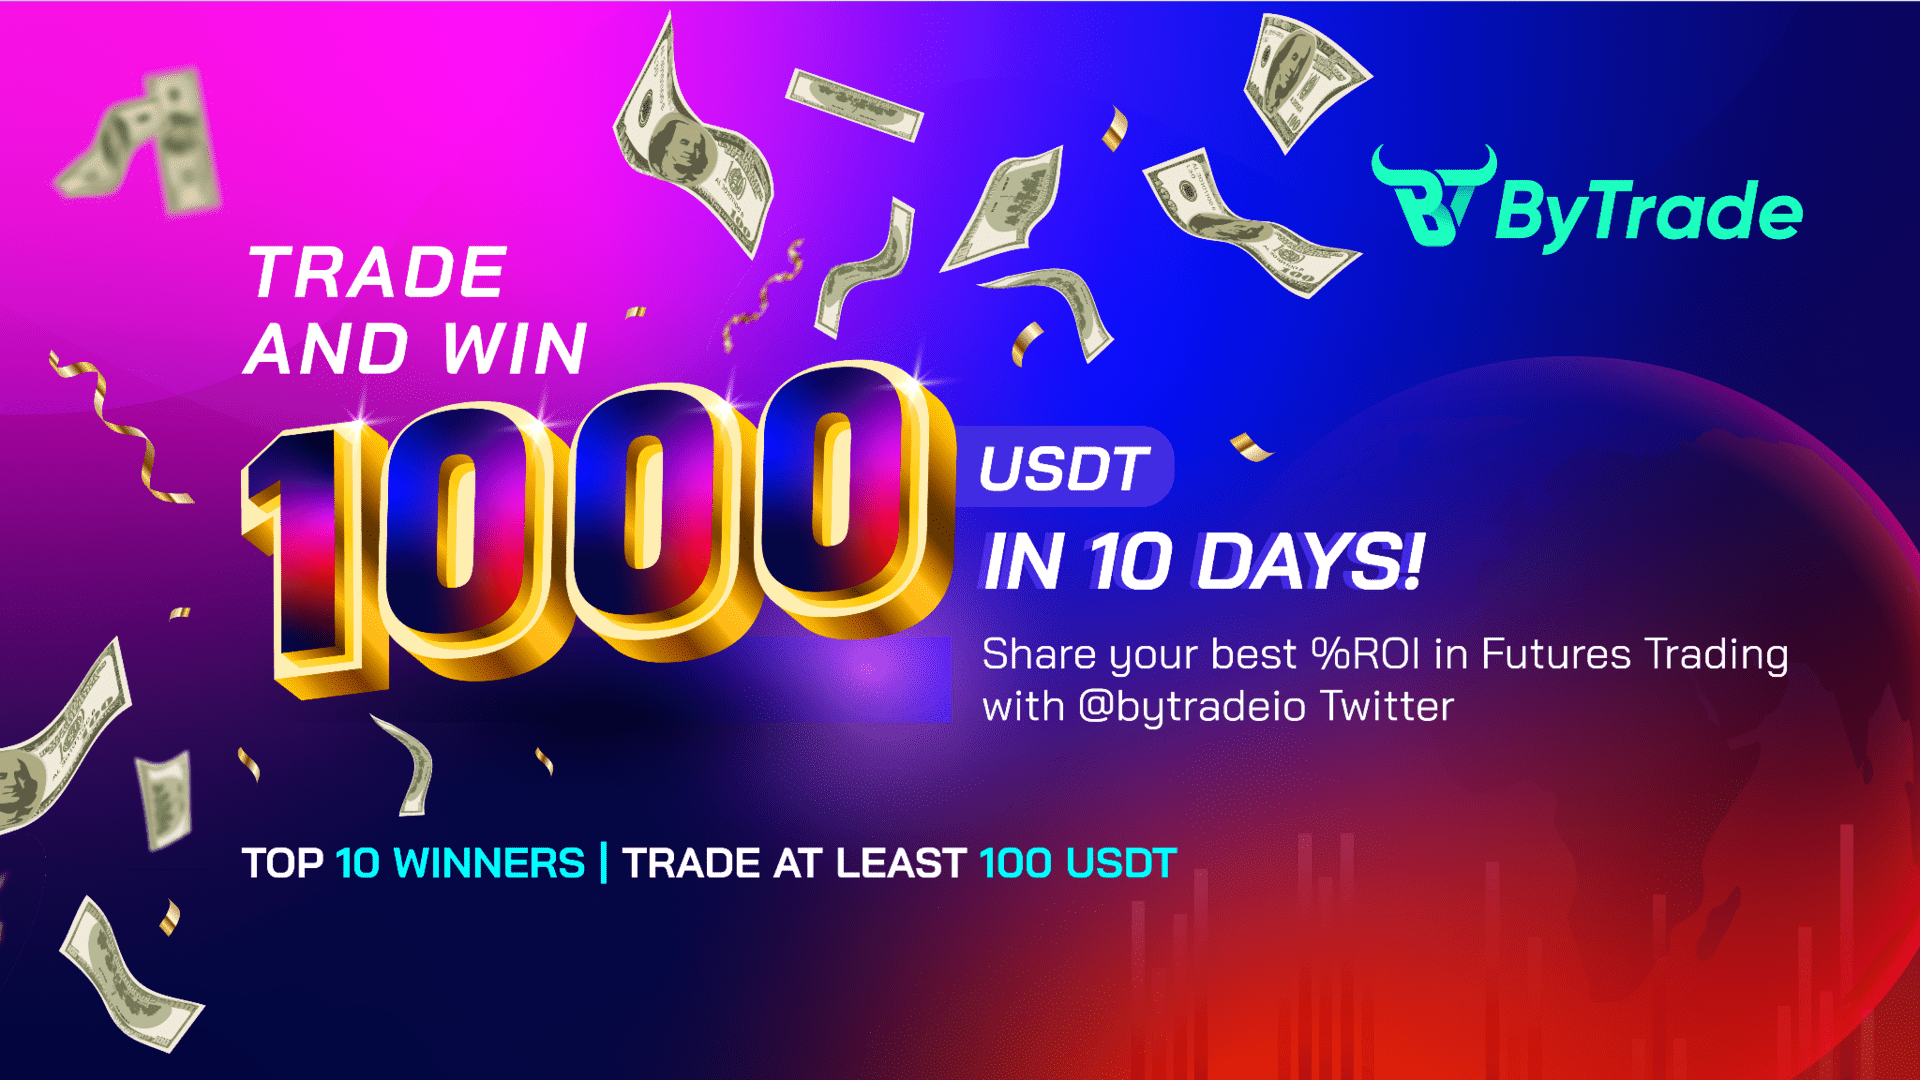 ByTrade to Give Away 1,000 USDT to Top10 Futures Traders in 10 Days